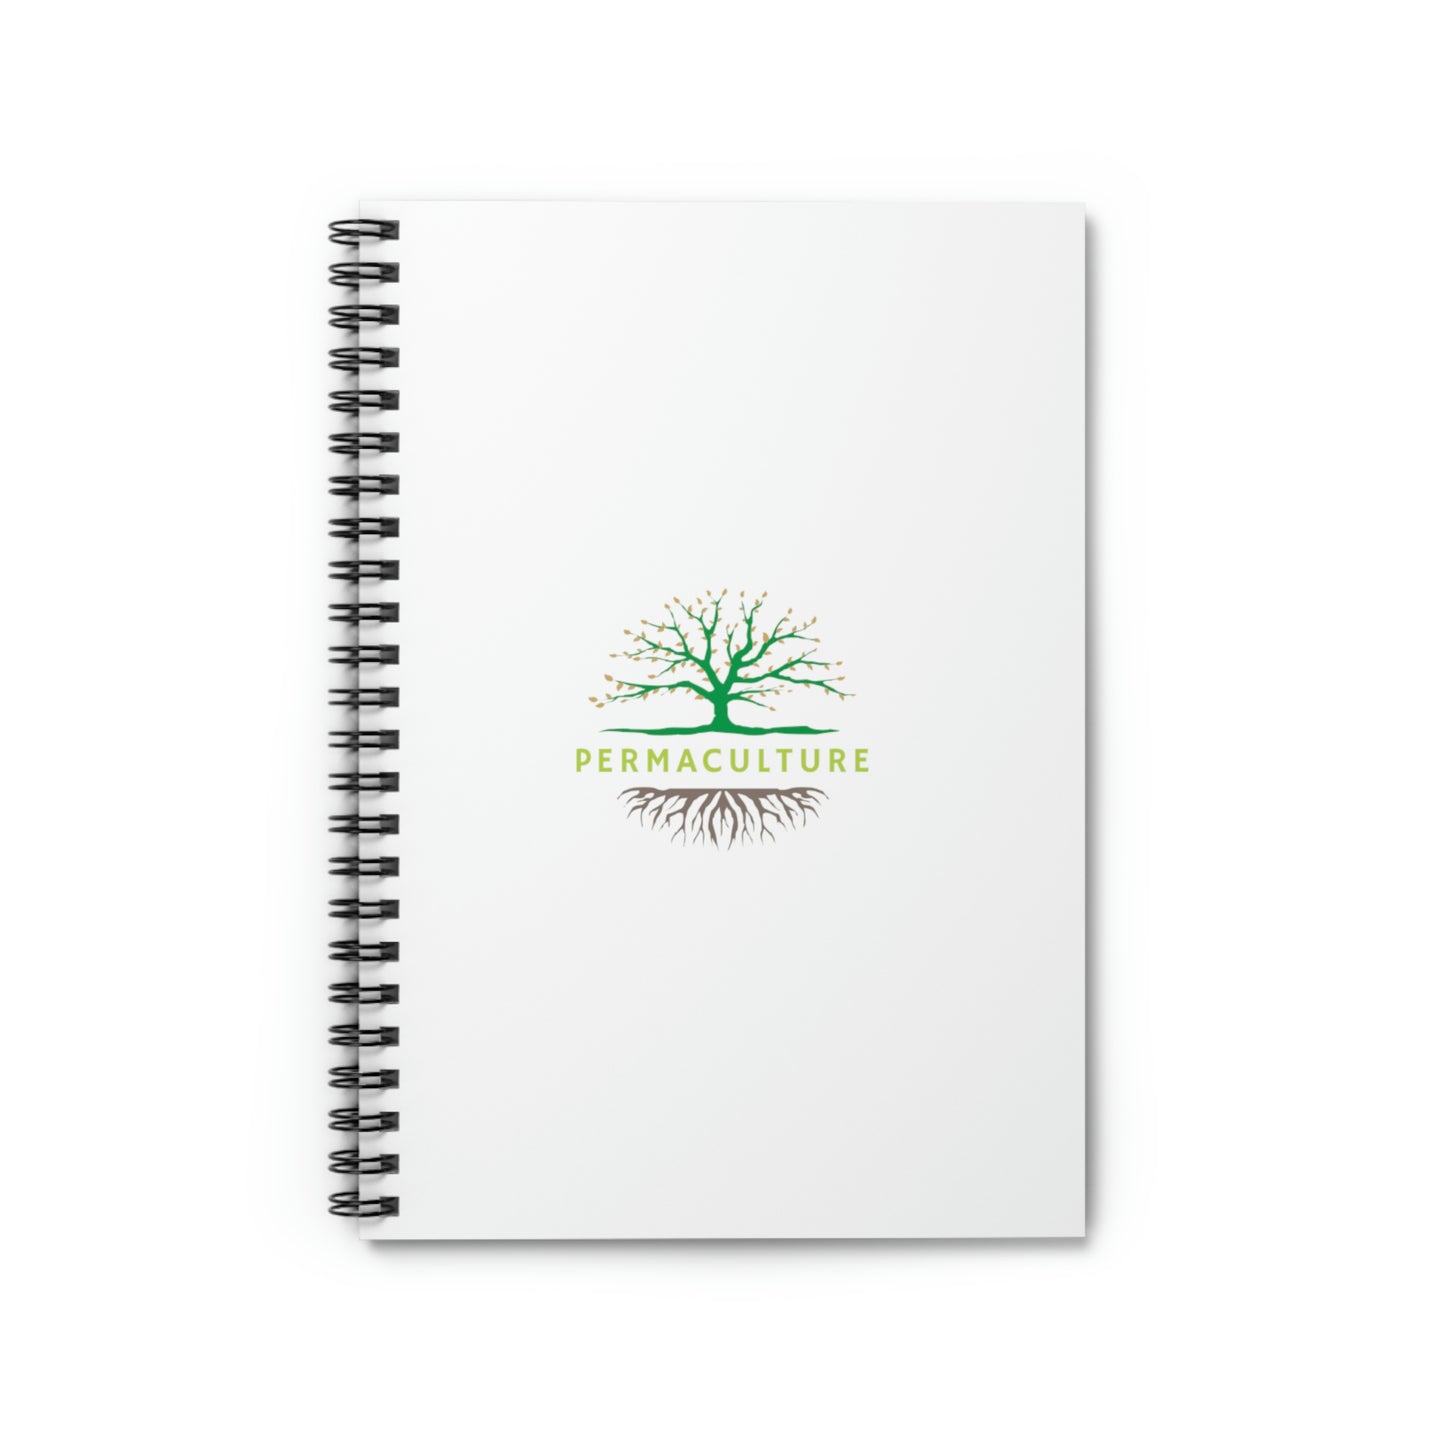 Permaculture - Spiral Notebook - Ruled Line - White Cover